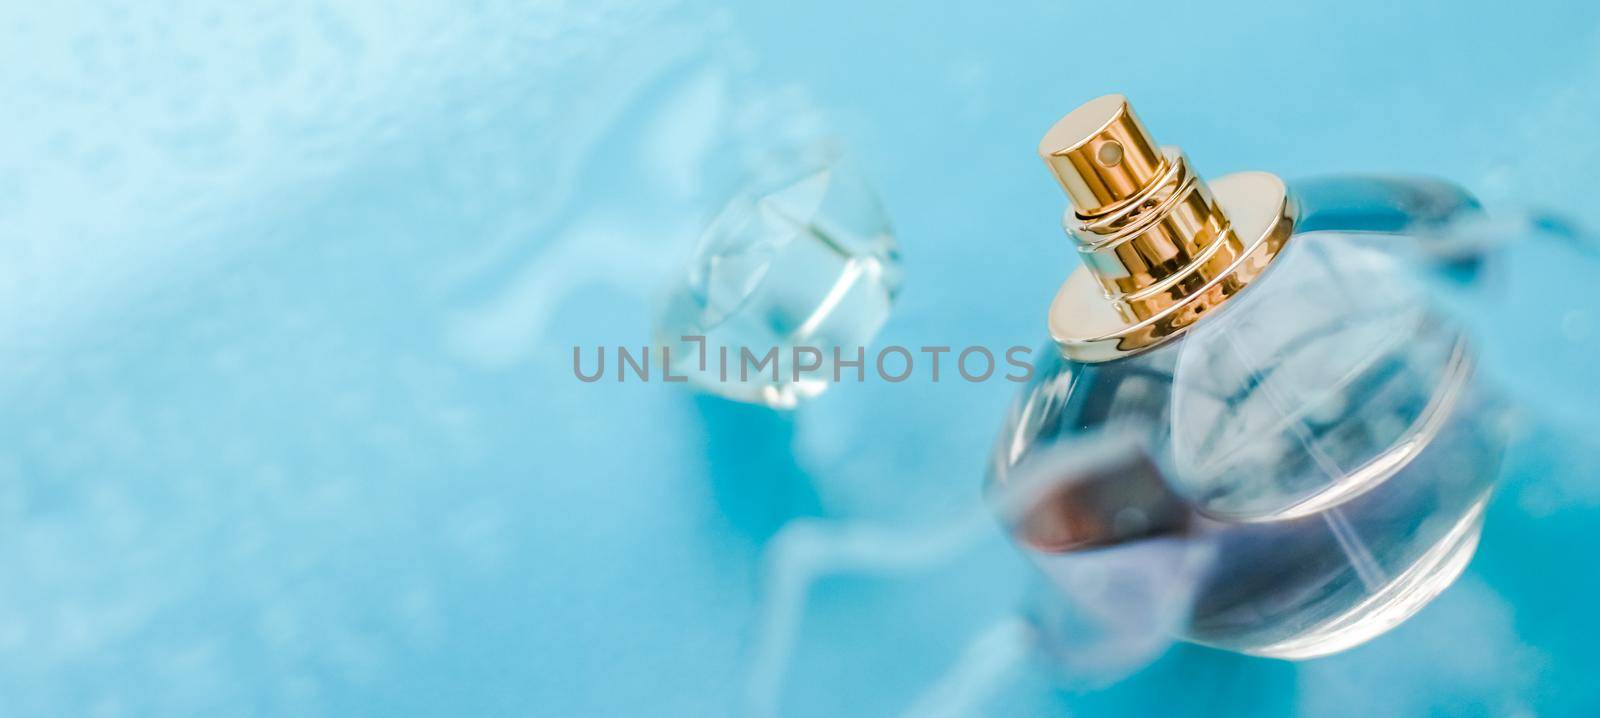 Perfumery, cosmetics and branding concept - Perfume bottle under blue water, fresh sea coastal scent as glamour fragrance and eau de parfum product as holiday gift, luxury beauty spa brand present